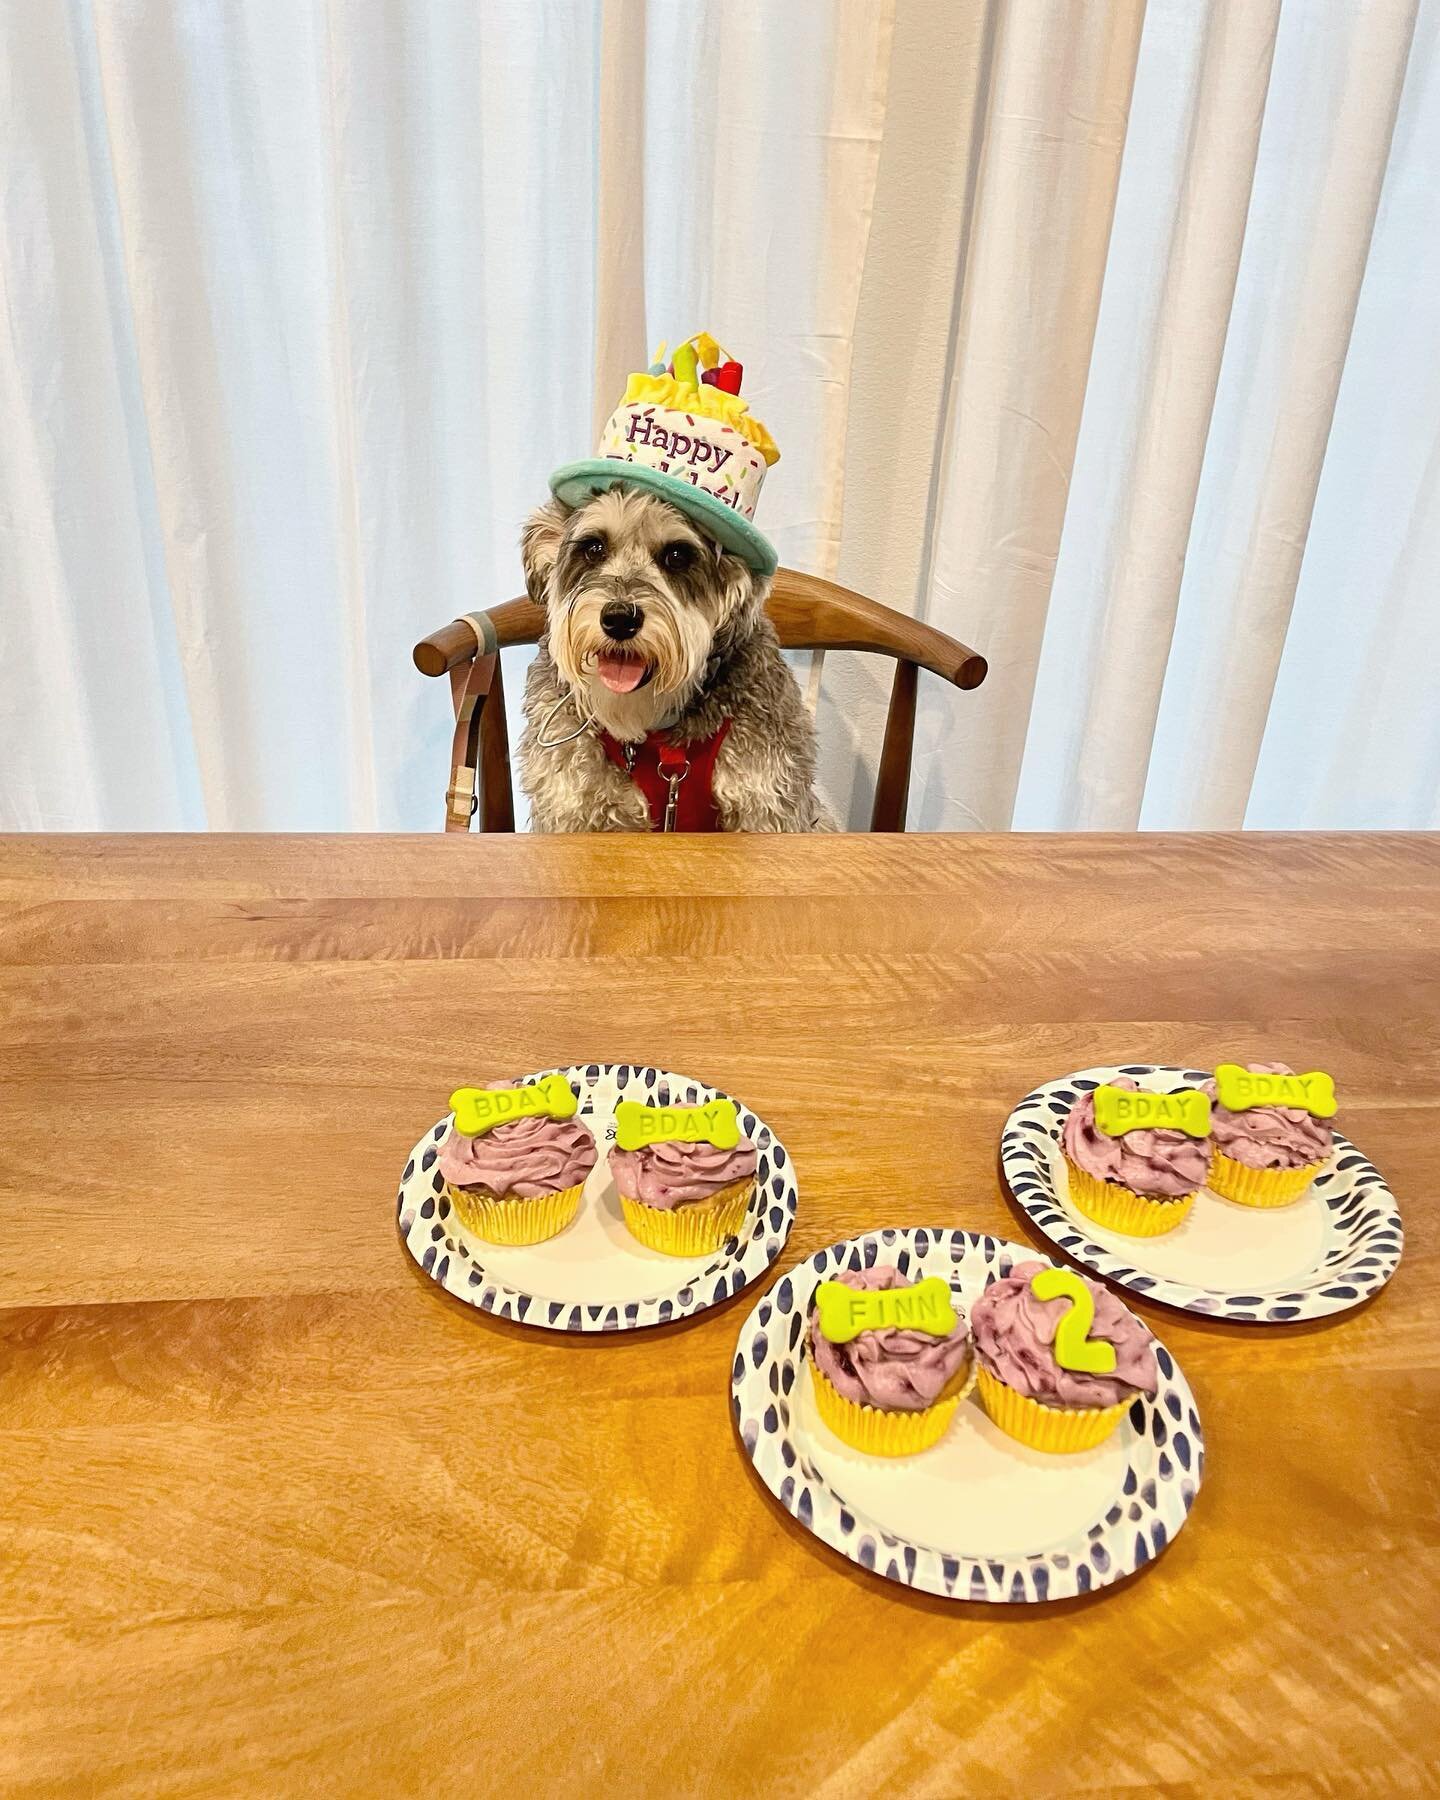 Happy Pawsome 2nd D-Day to our friend Finn! #atx #atxdogs #atxdog #atxdogstagram #dogsofinstagram #dogsofzilkerpark #dogtreats #dogcakes #dogbirthday #birthdaydog #specialdog #petsofinstagram #petstagram #petsagram #cattreats #cats
#dogsitter #happyd